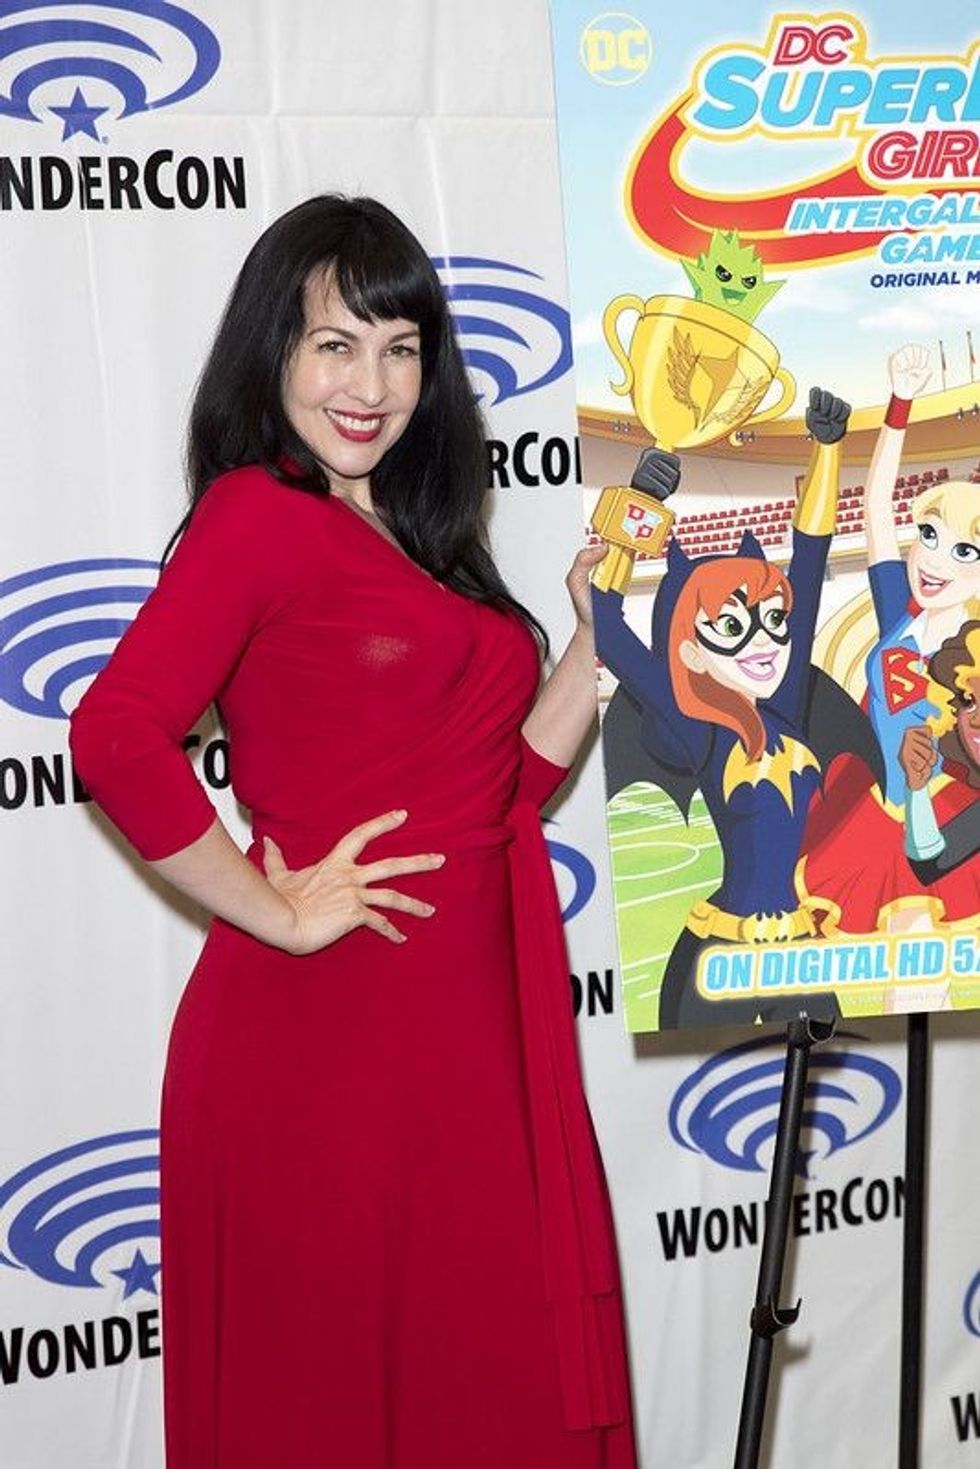 Discover all the fun facts about your favorite voice actress Grey DeLisle, her birthday, and net worth.